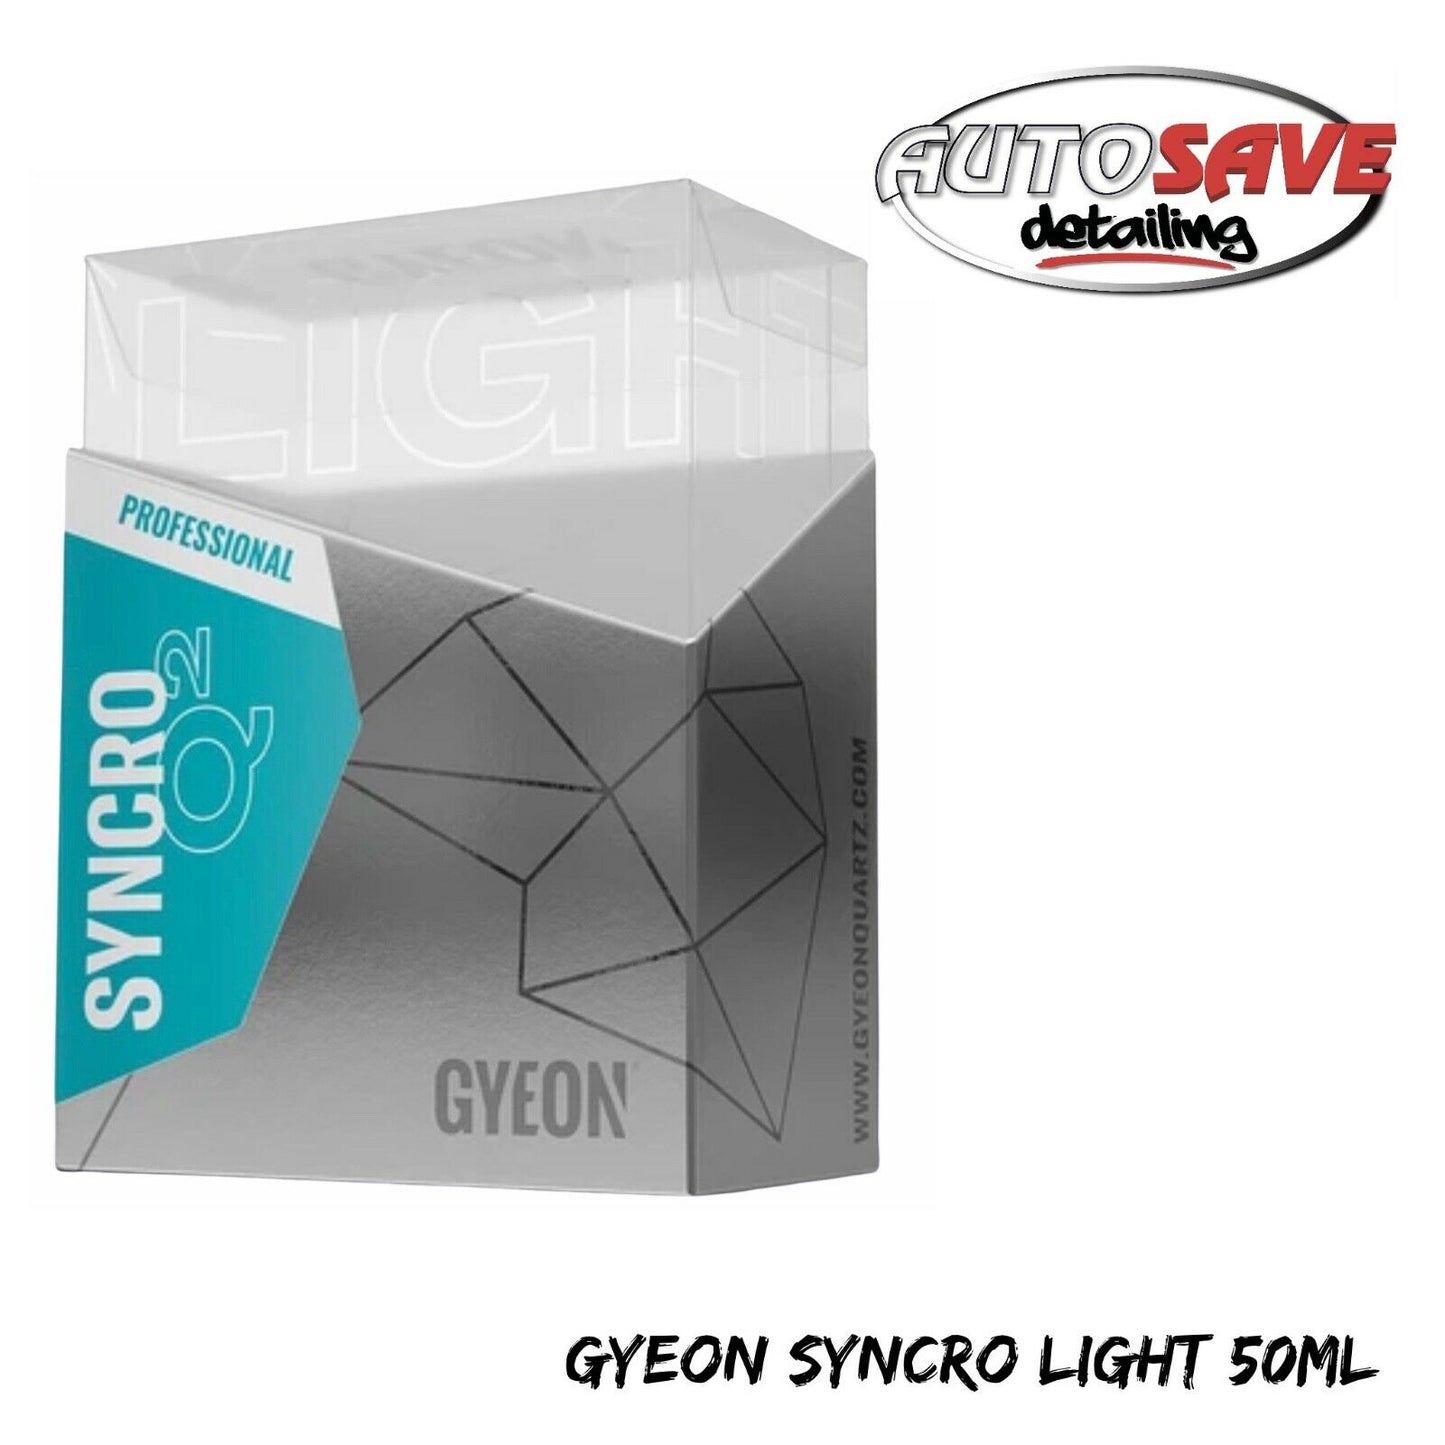 Gyeon Q² Syncro Light  50 ml Excellent Product